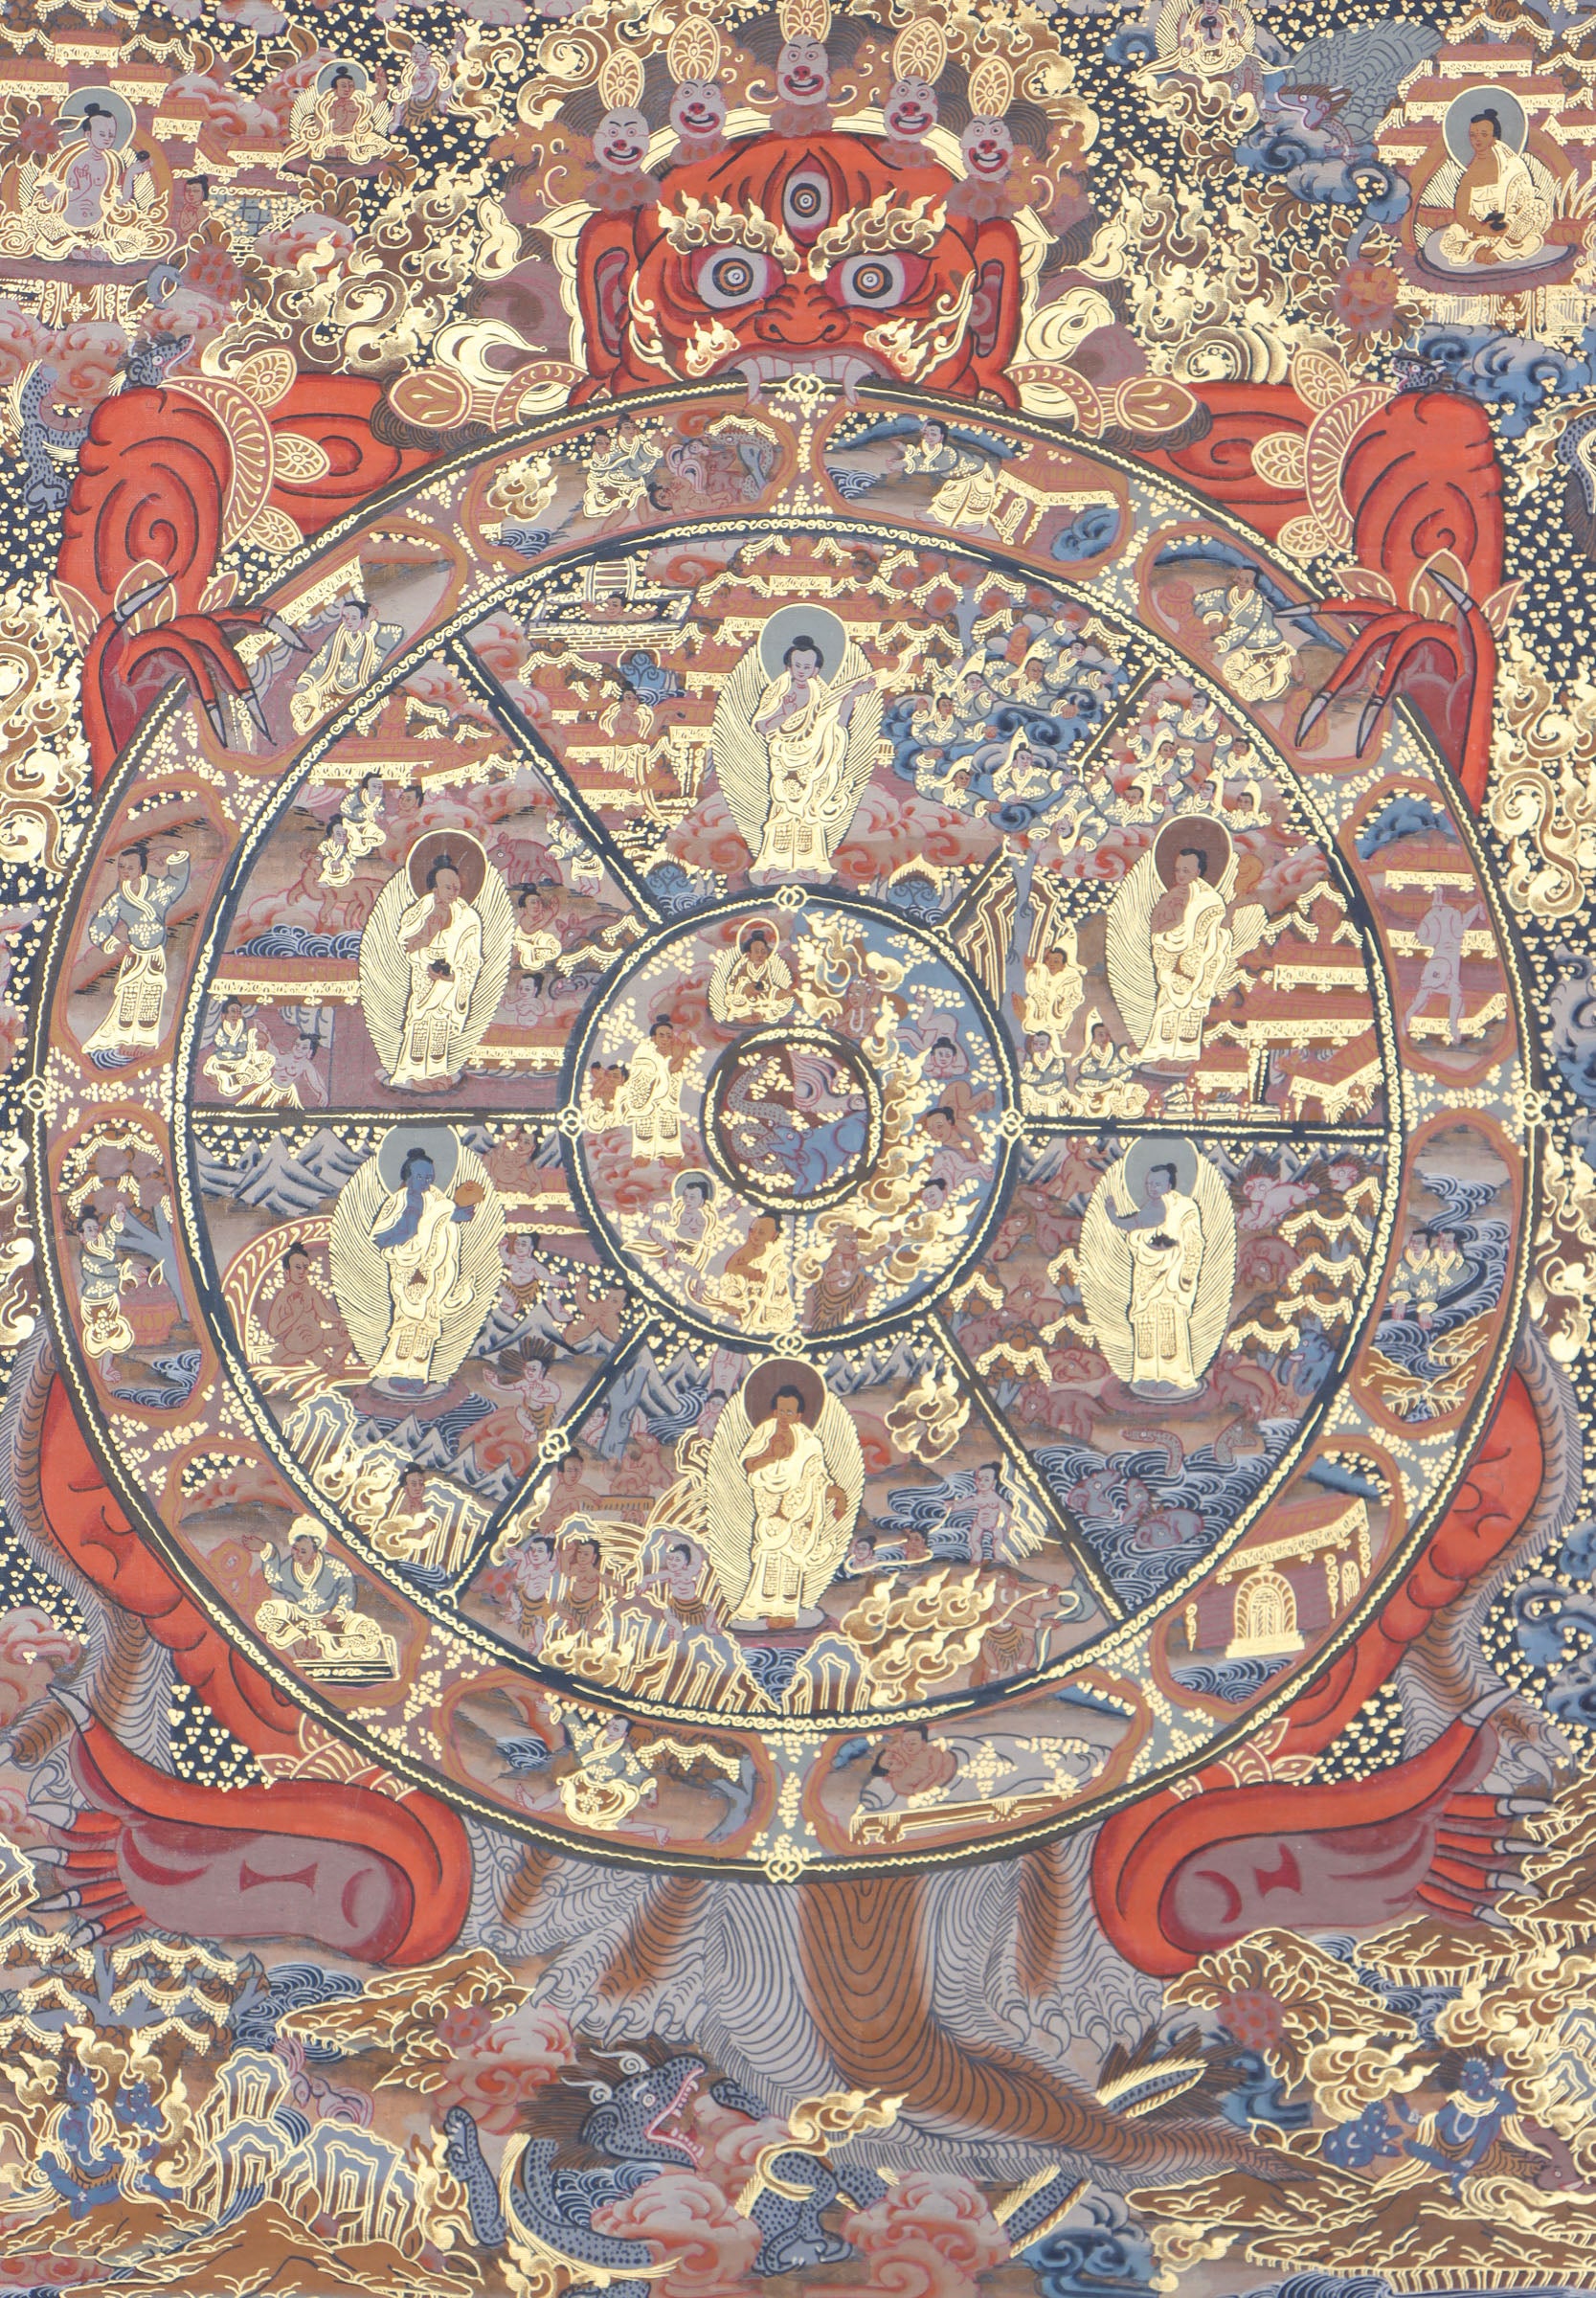 Wheel of Life Thangka provides an effective tool for spiritual contemplation and understanding.